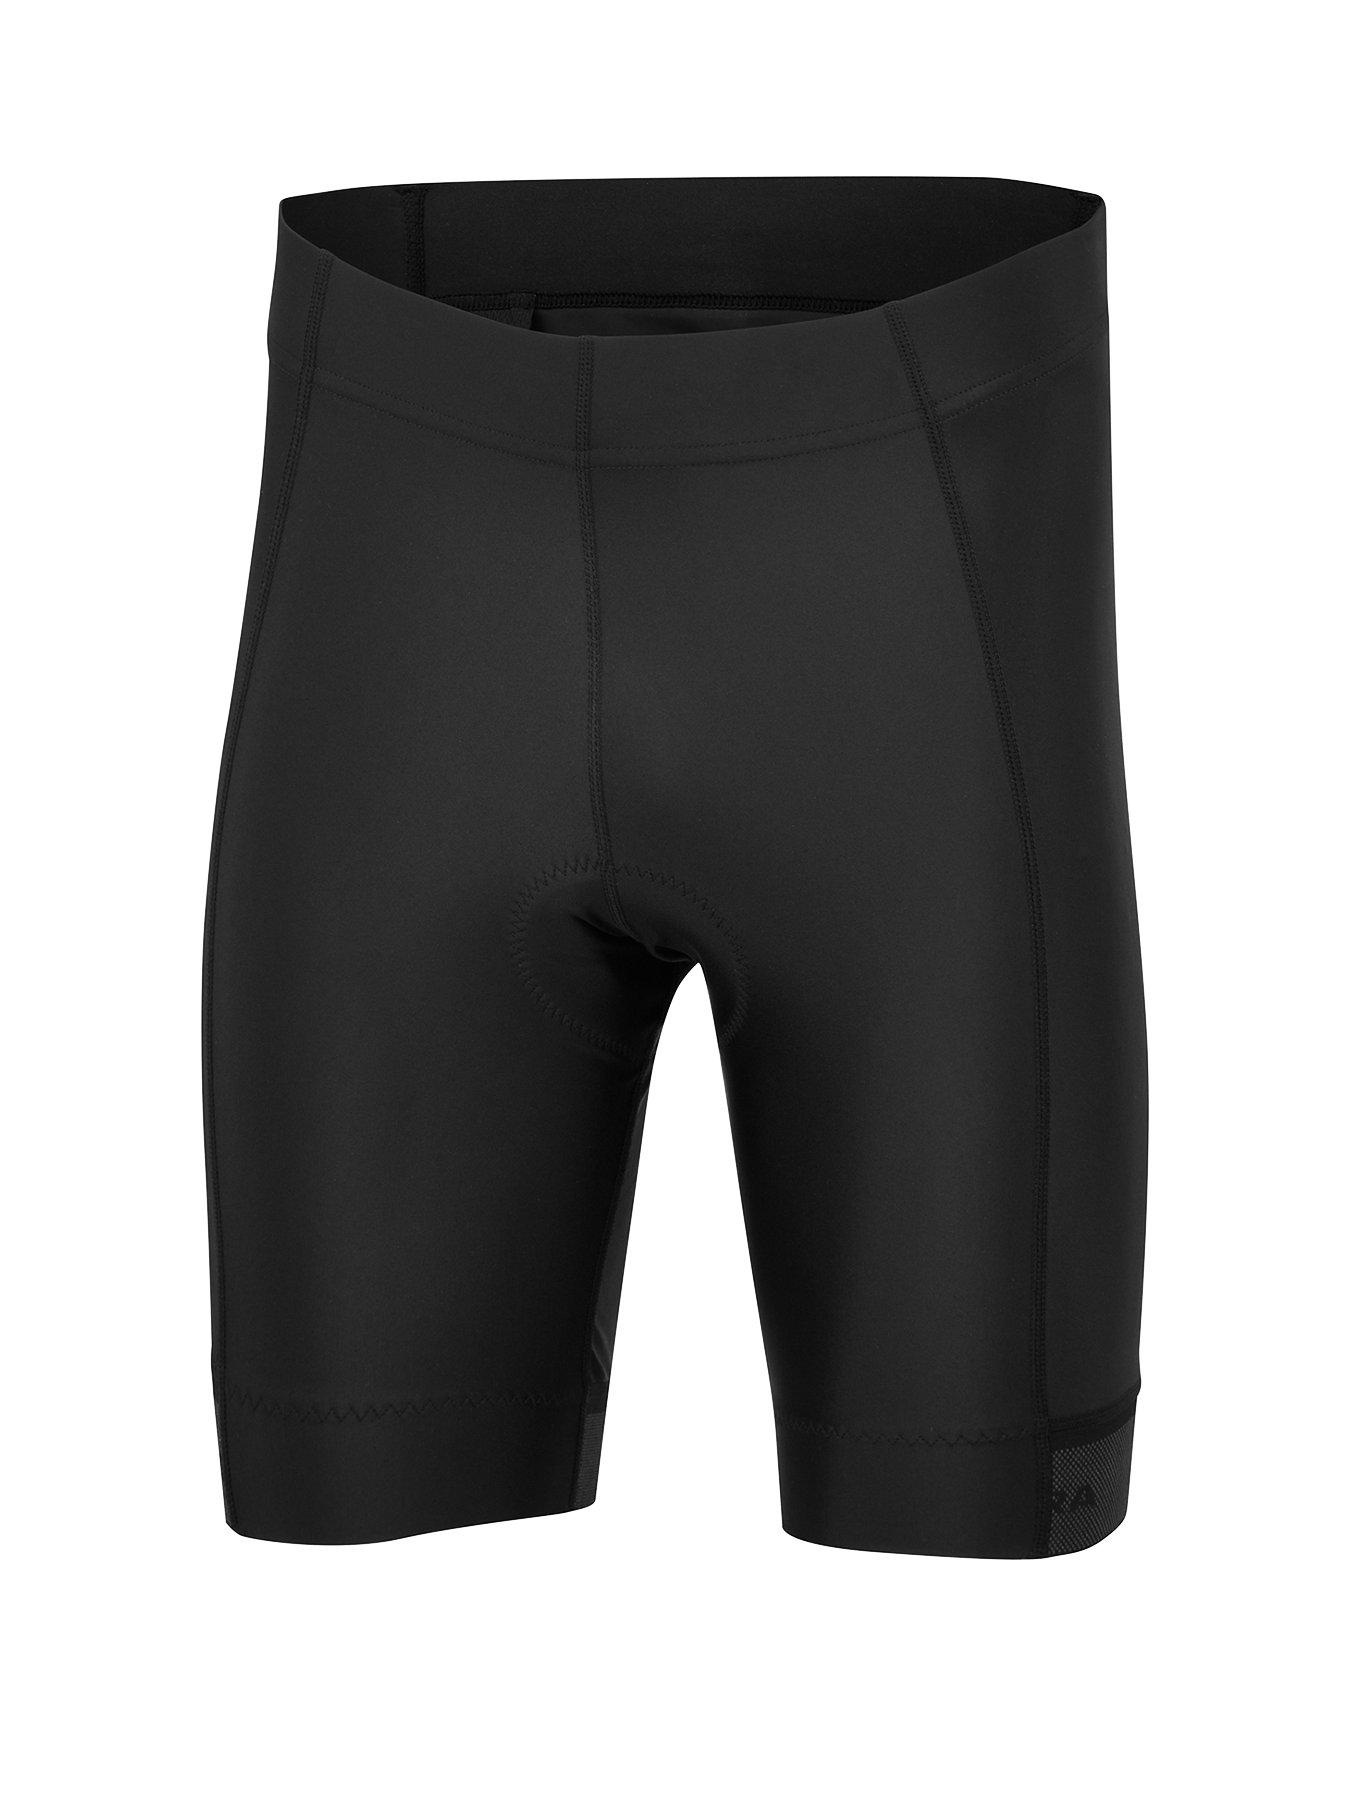 Details about   Mens Cycling Short Padded Under Bike Riding Gym Running Cycle Sport Cyclical 